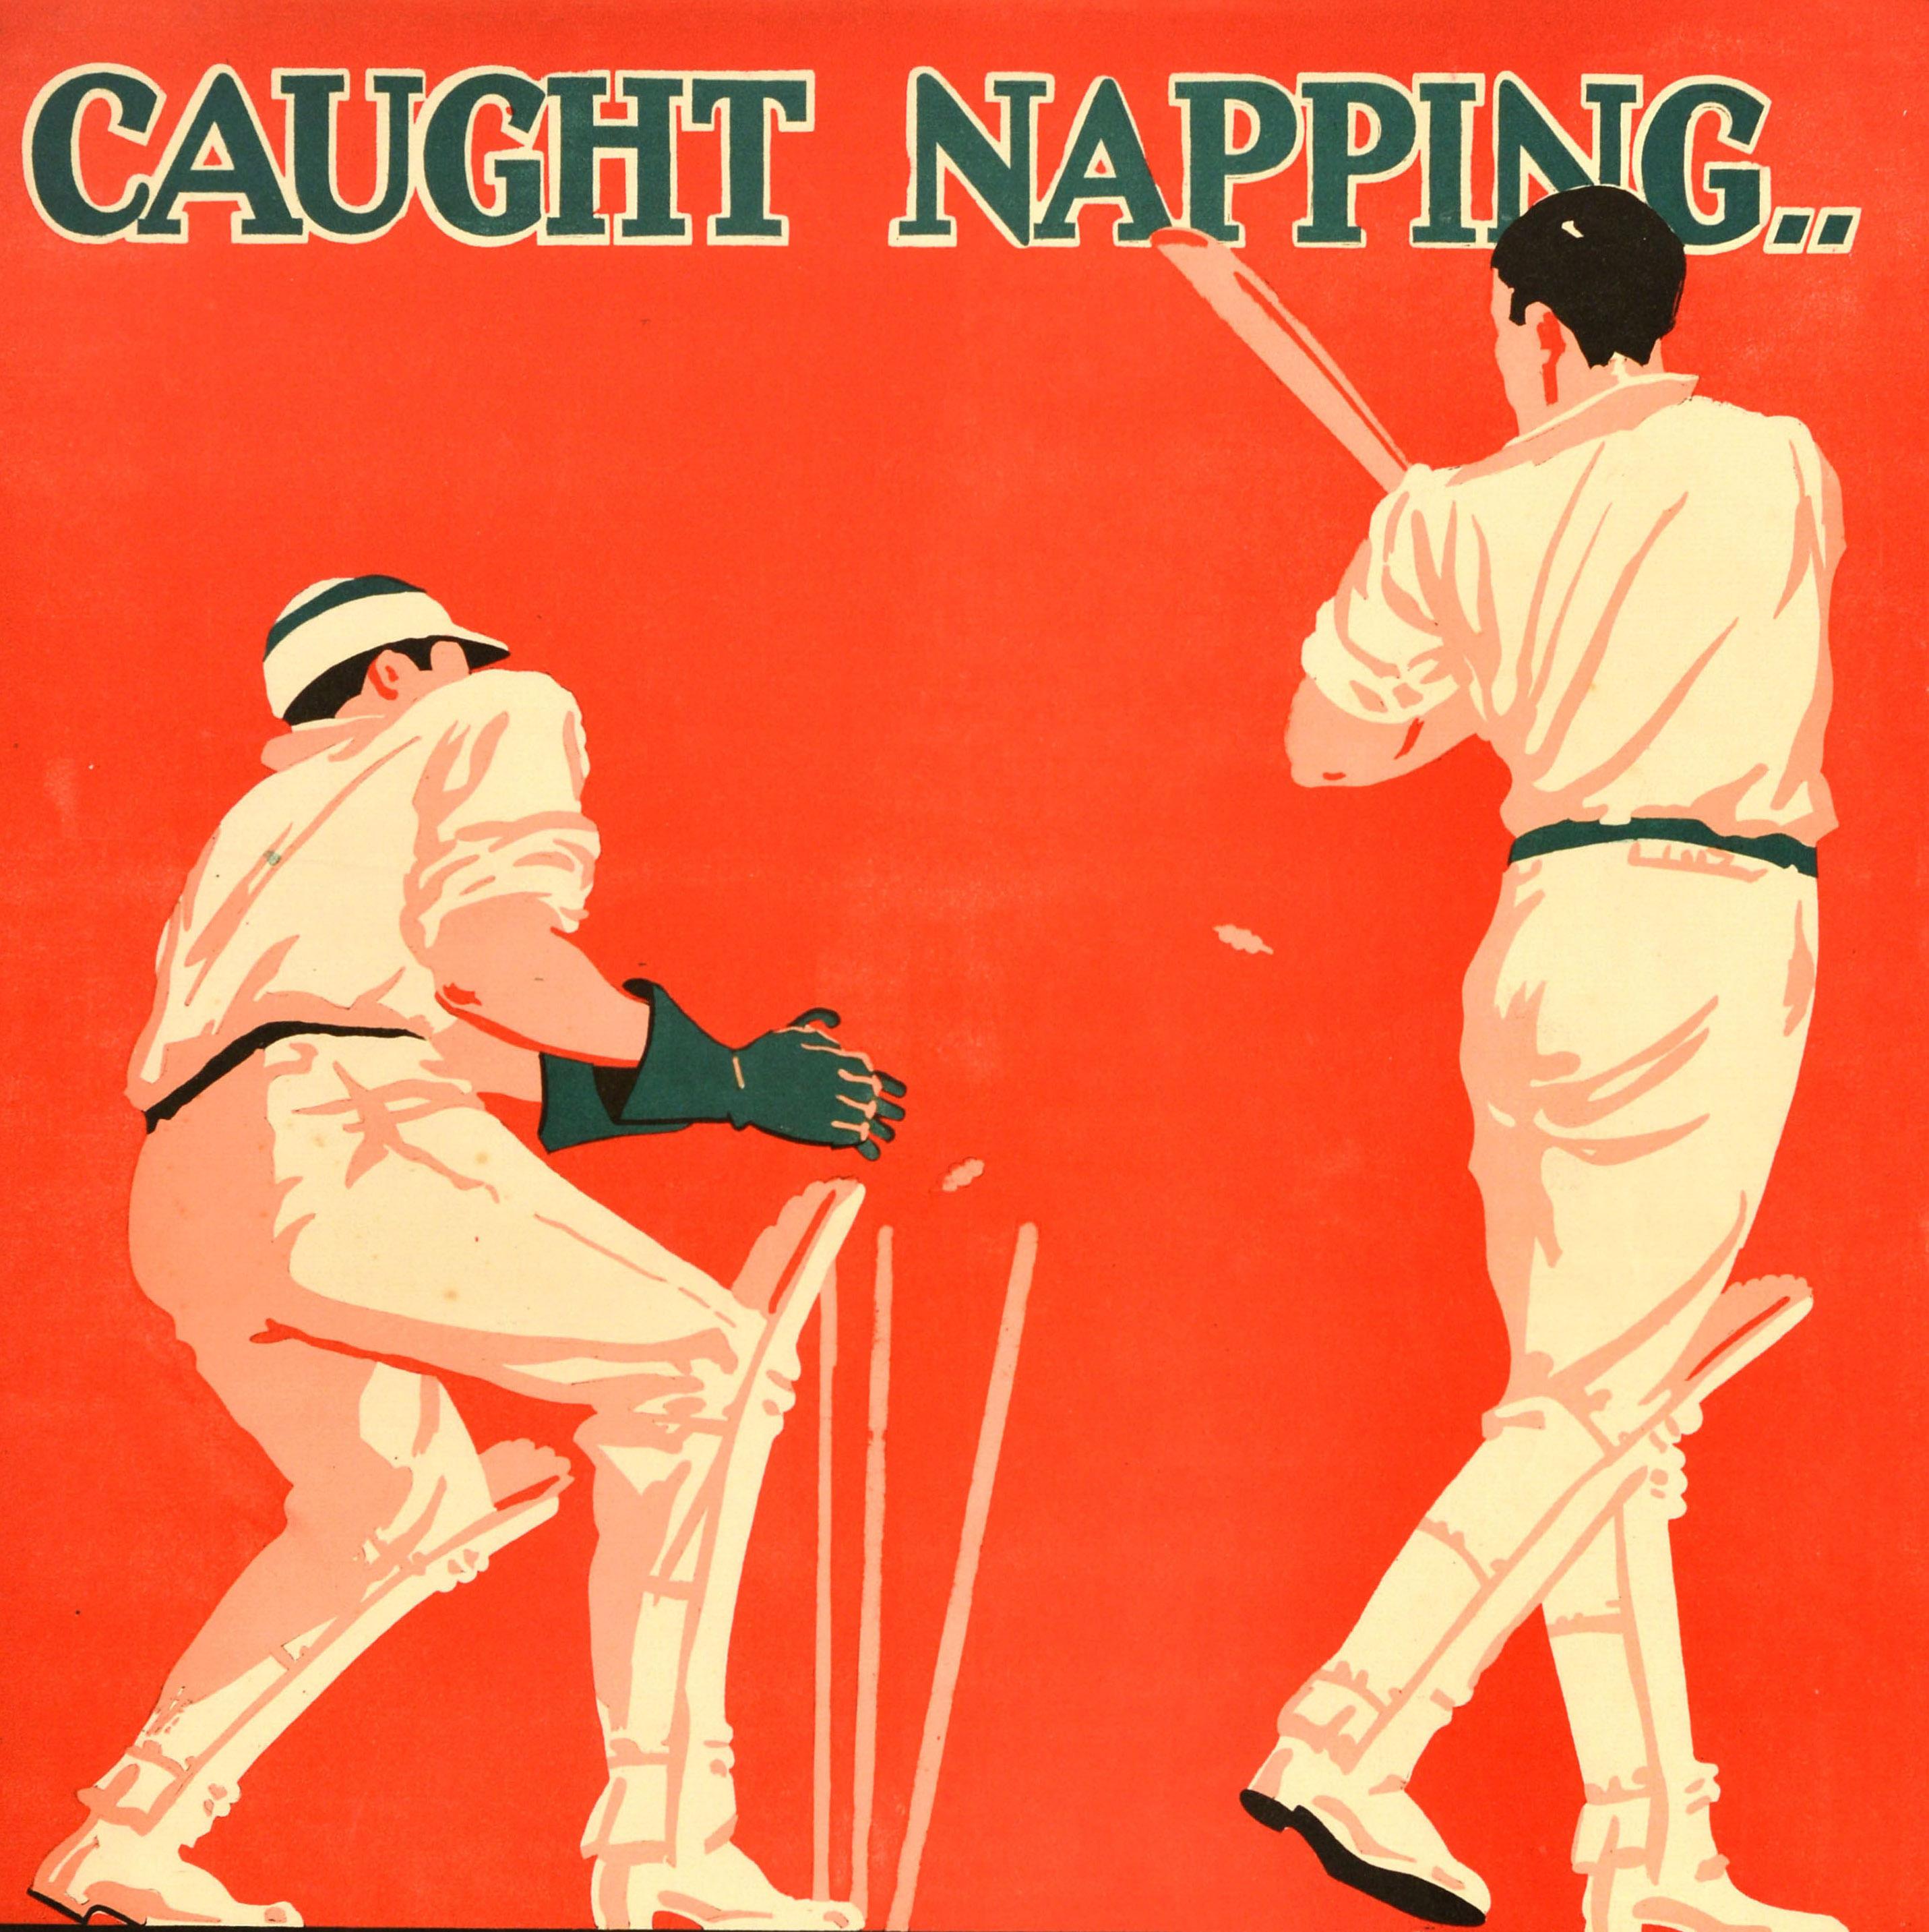 Original Vintage Workplace Motivational Poster Caught Napping Cricket Bill Jones - Print by Unknown